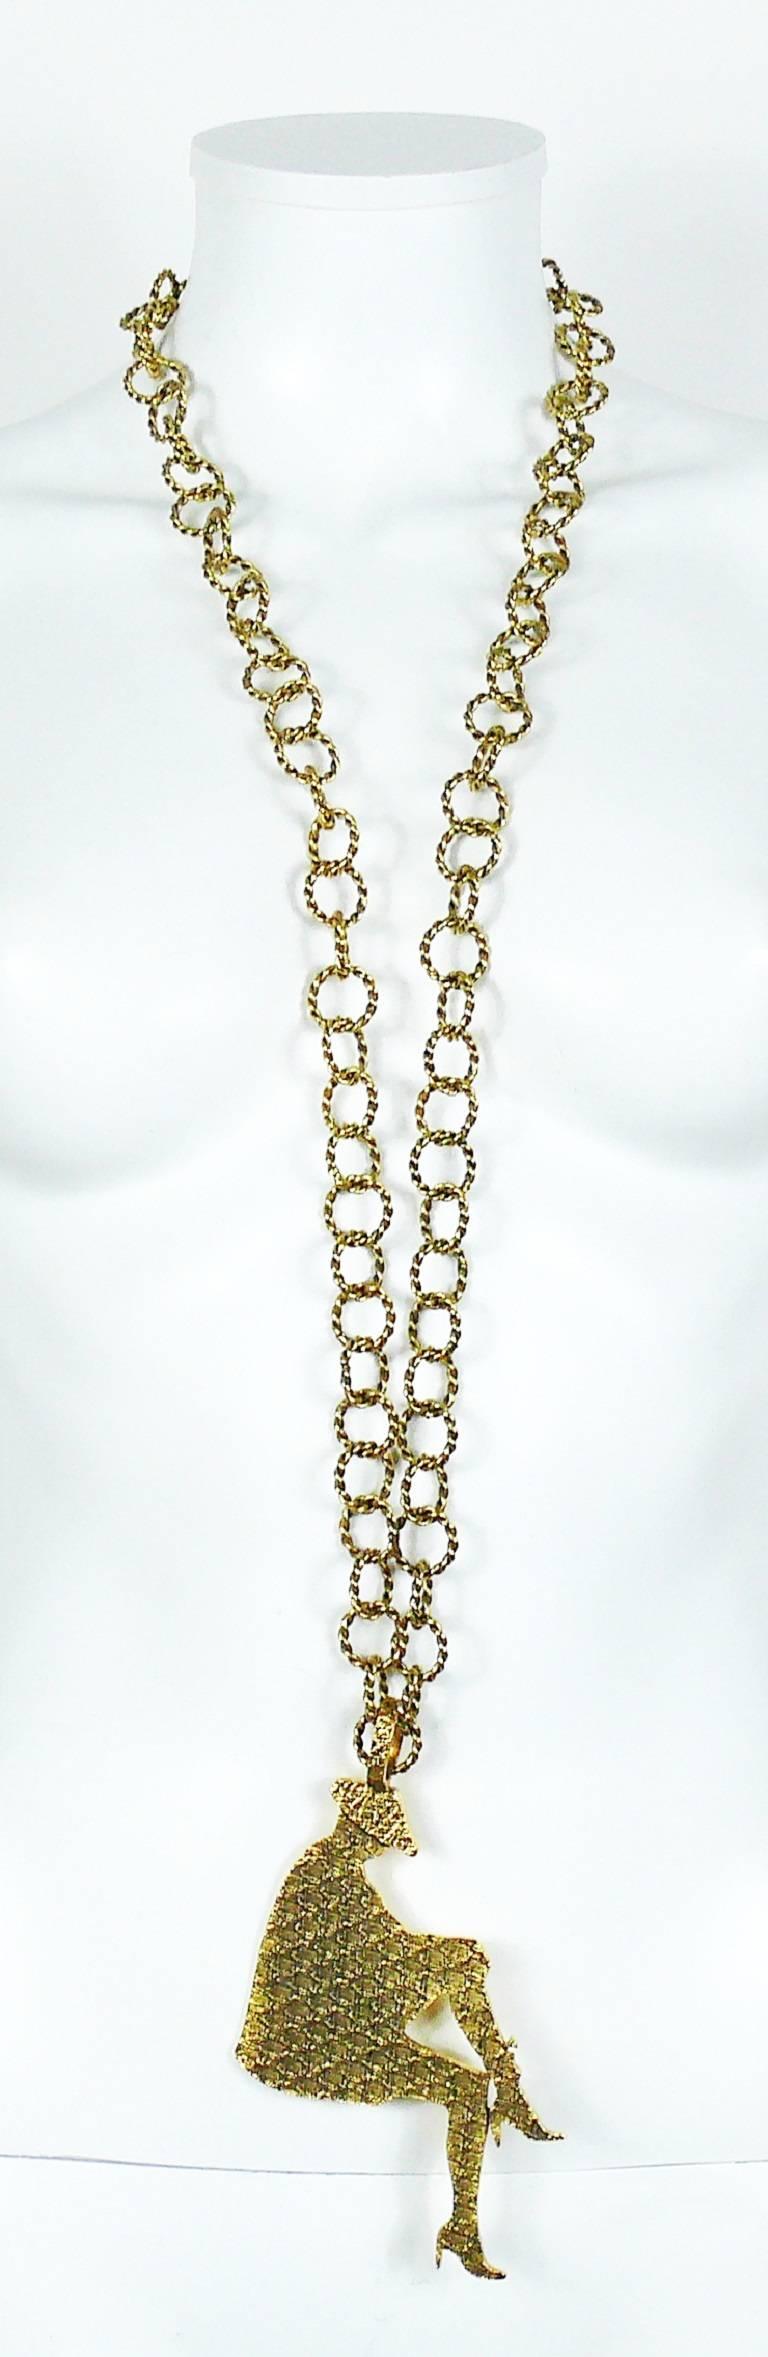 YVES SAINT LAURENT antiqued gold tone chain sautoir necklace featuring a massive textured sitting woman silhouette pendant inspired by MONSIEUR SAINT LAURENT fashion photos.

As seen on the runway at the Fall/Winter RTW 2010 Collection designed by